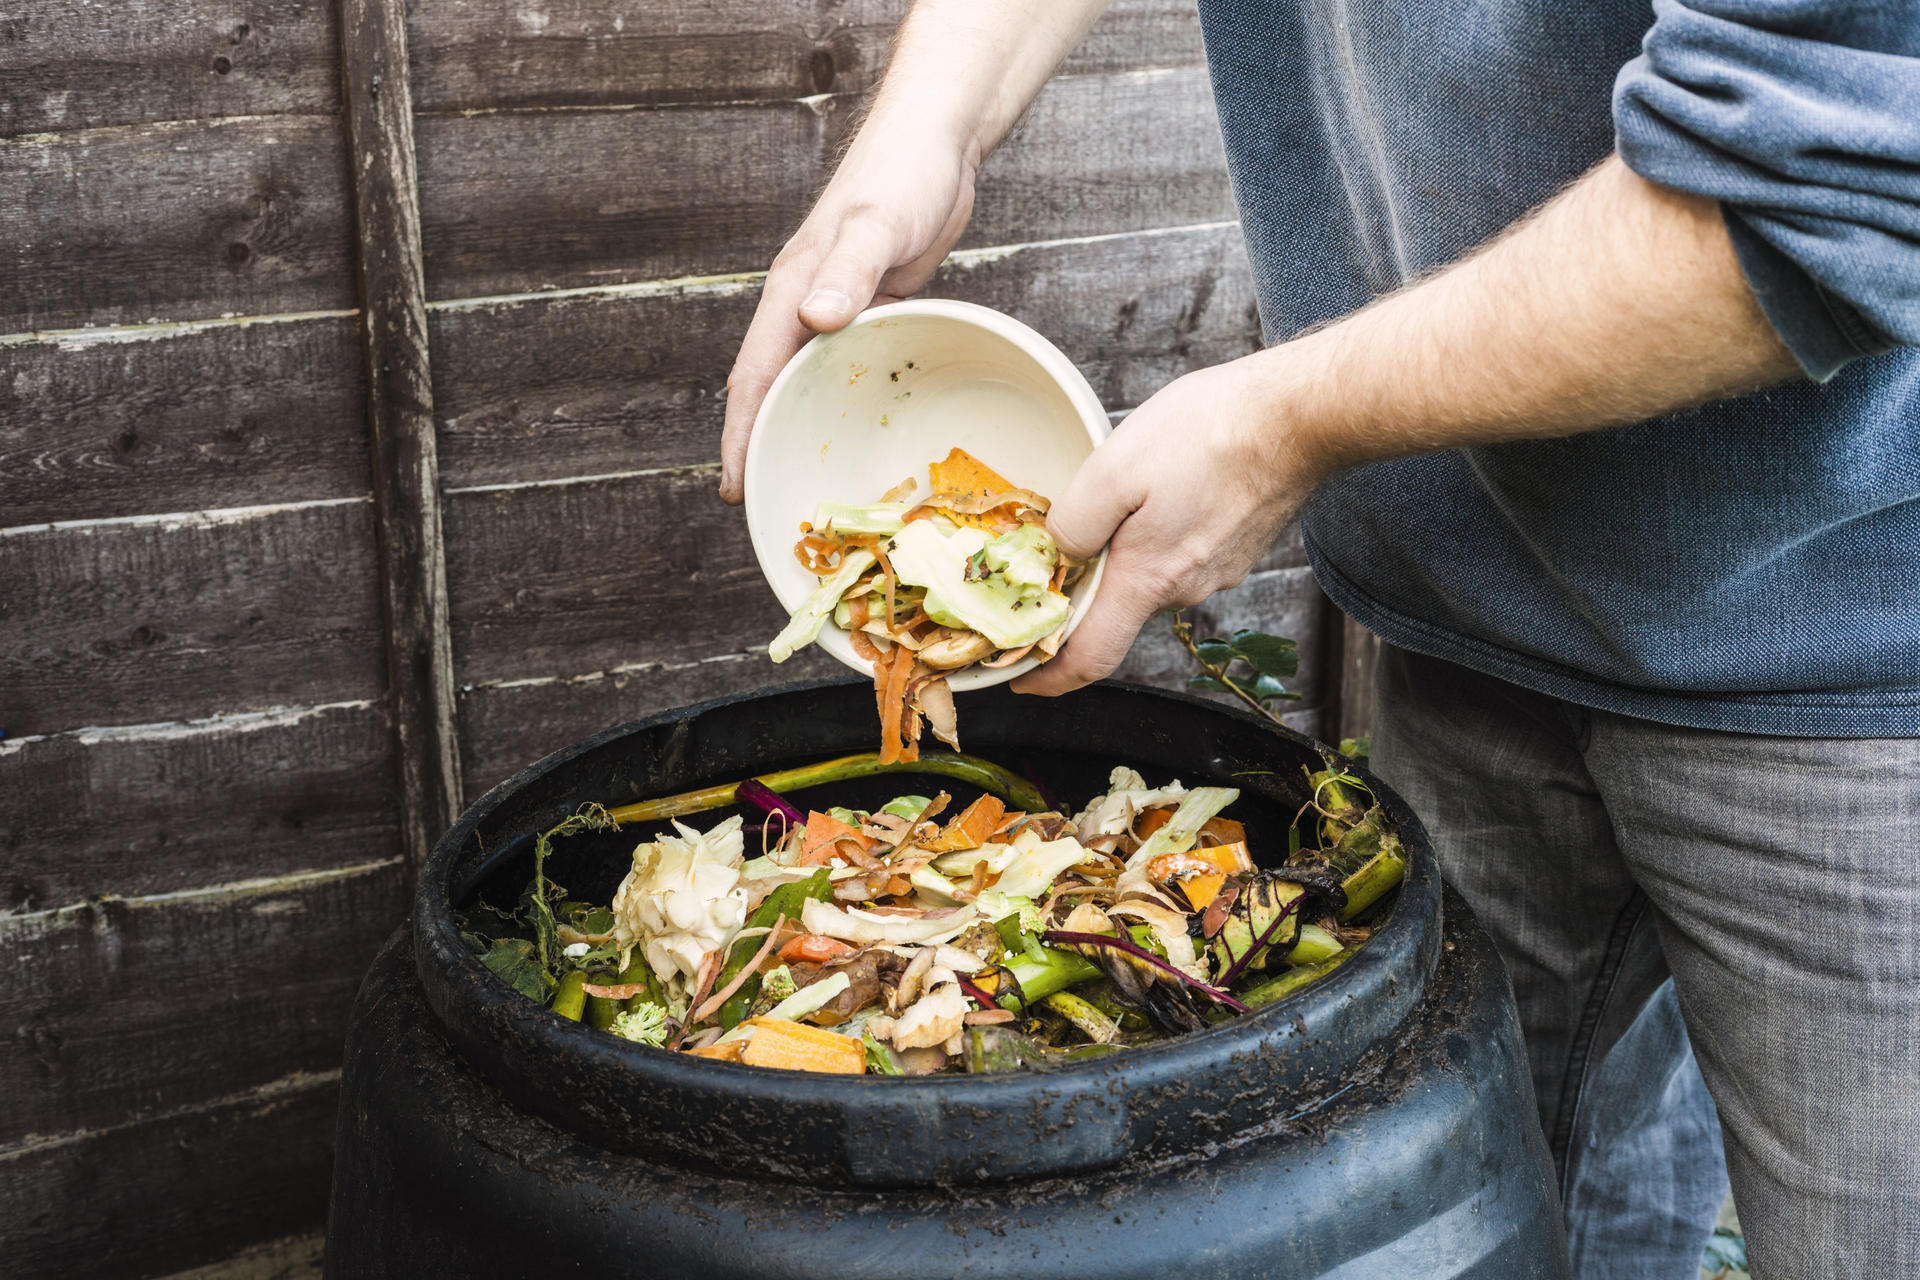 Compost bins can help ease the city's waste problem. Photo: Corbis